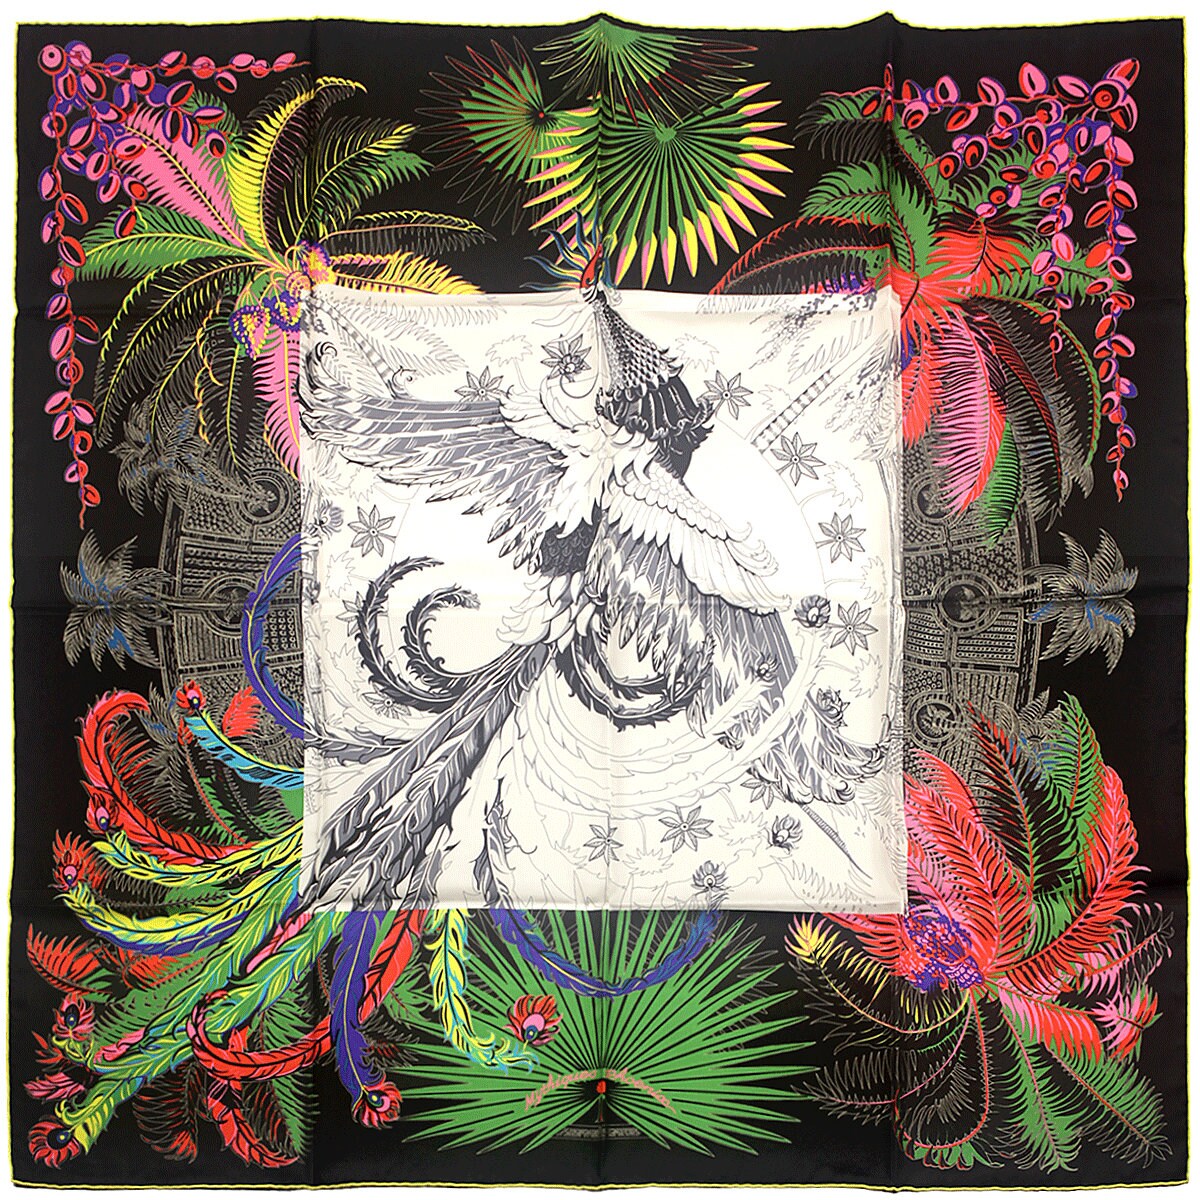 Hermes Scarf "Mythiques Phoenix" by Laurence Bourthoumieux 90cm Silk | Carre Foulard